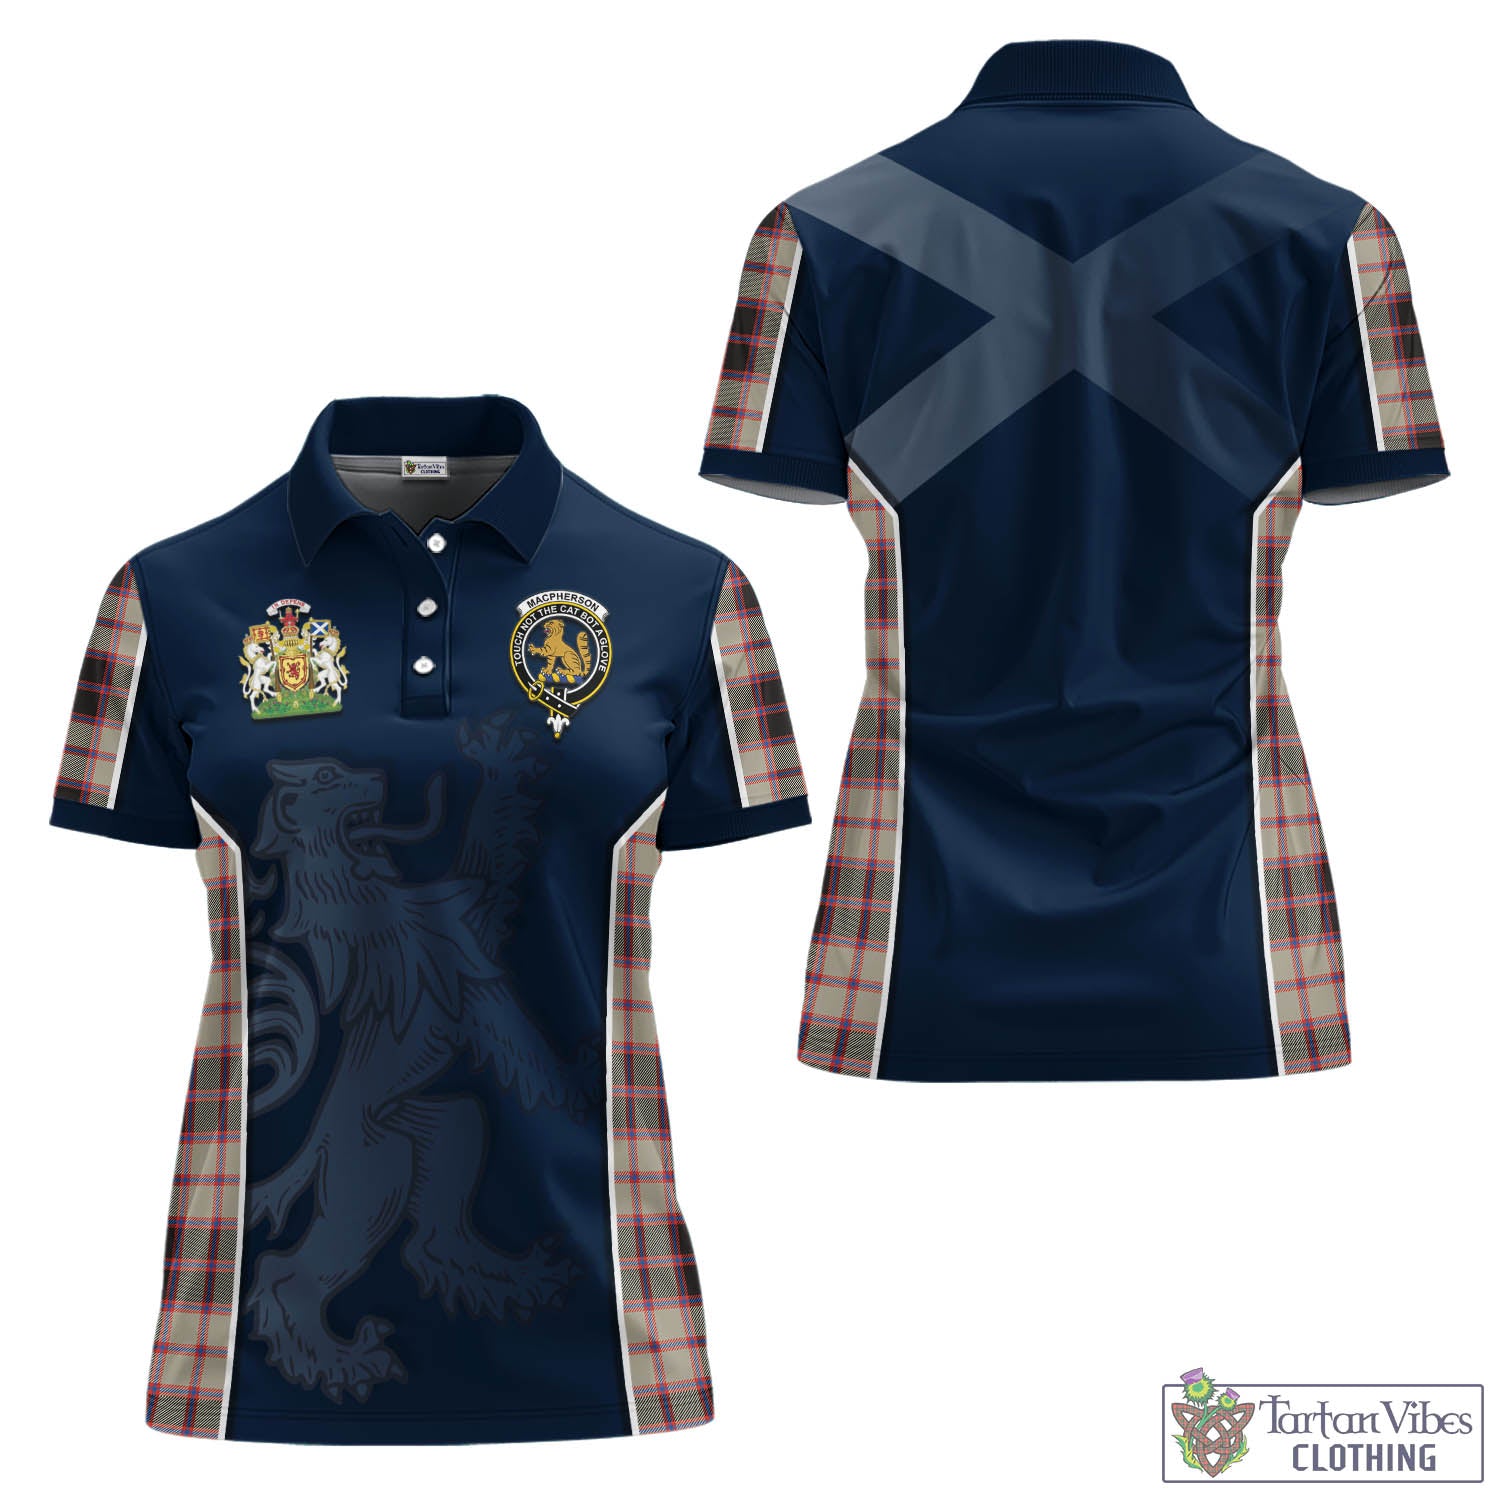 Tartan Vibes Clothing MacPherson Hunting Ancient Tartan Women's Polo Shirt with Family Crest and Lion Rampant Vibes Sport Style